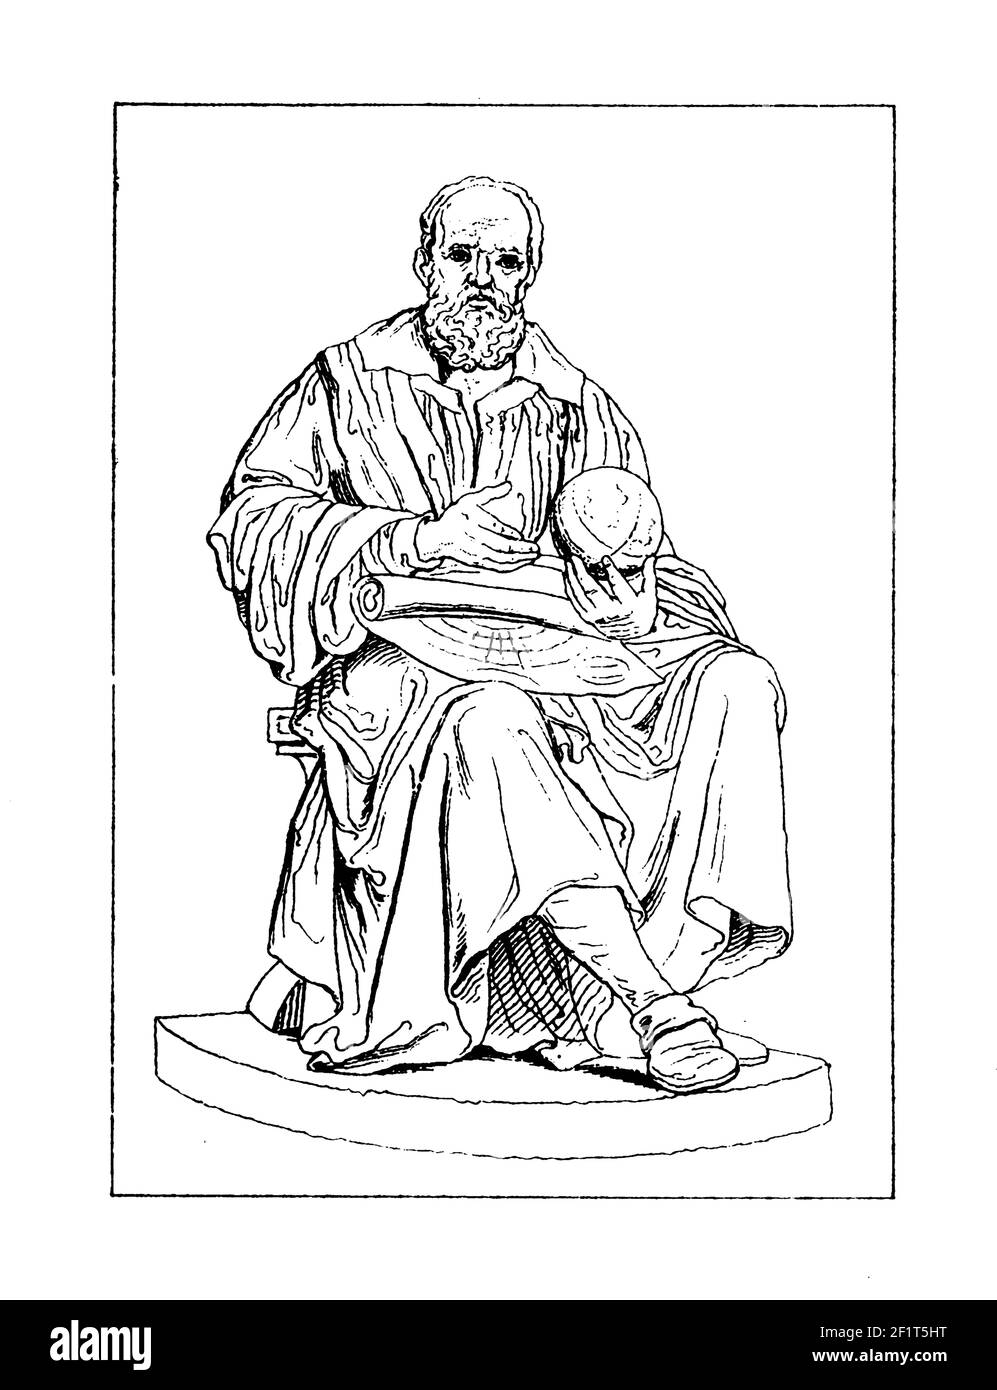 Vintage illustration of a portrait of Galileo Galilei, Italian physicist, mathematician, astronomer, and philosopher who played a major role in the Sc Stock Photo